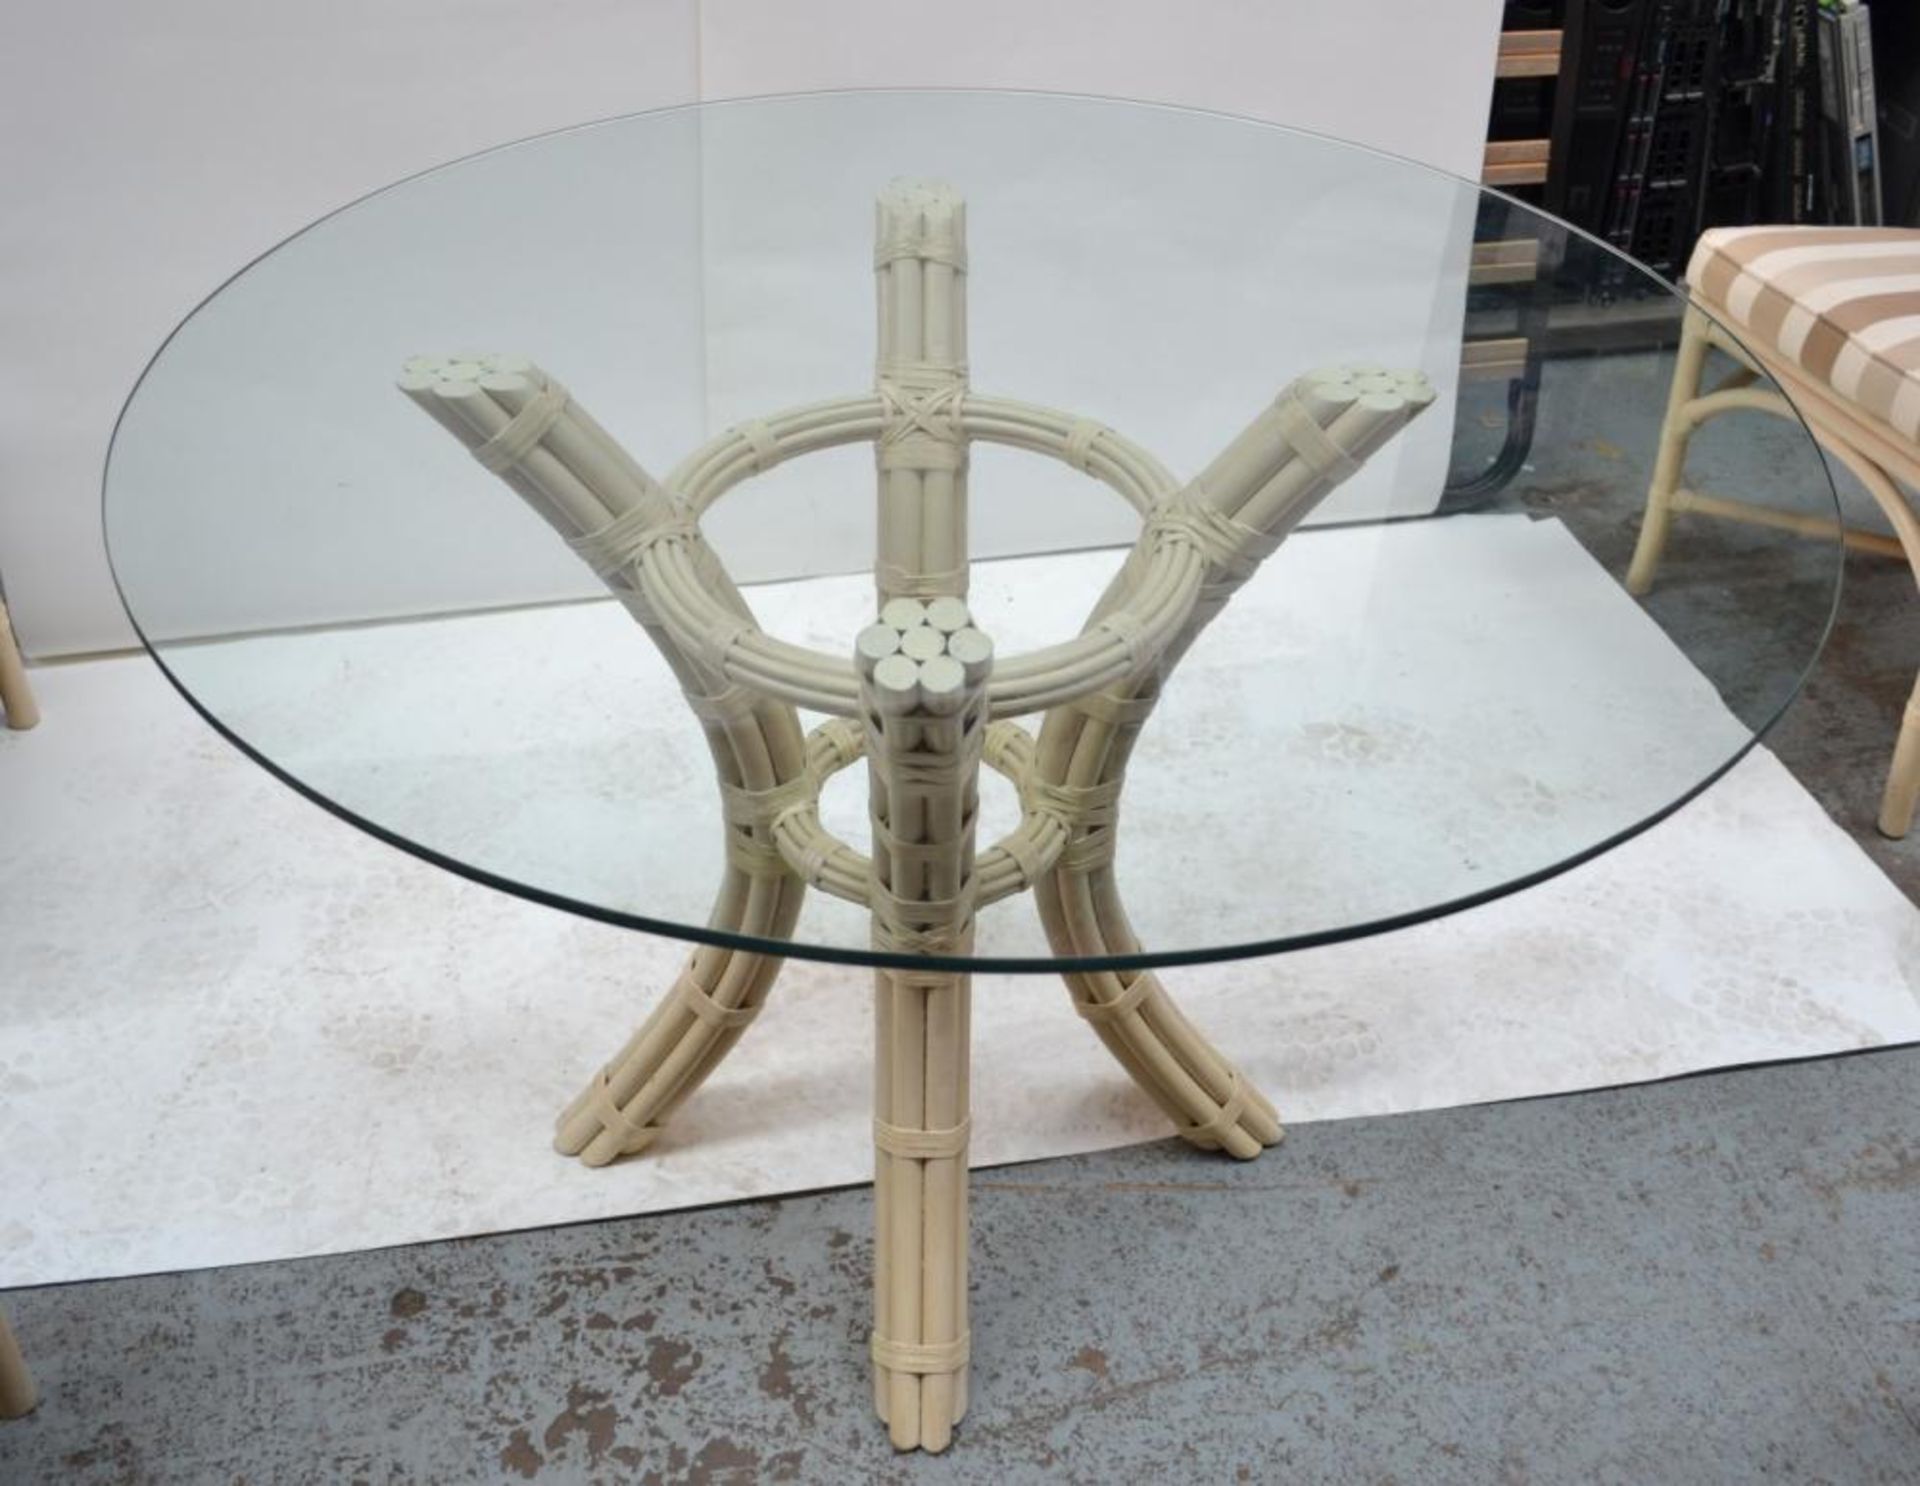 Glass Topped Cane Table with 4 Chairs - Pre-owned In Good Condition - AE010 - CL007 - Location: Altr - Image 12 of 13